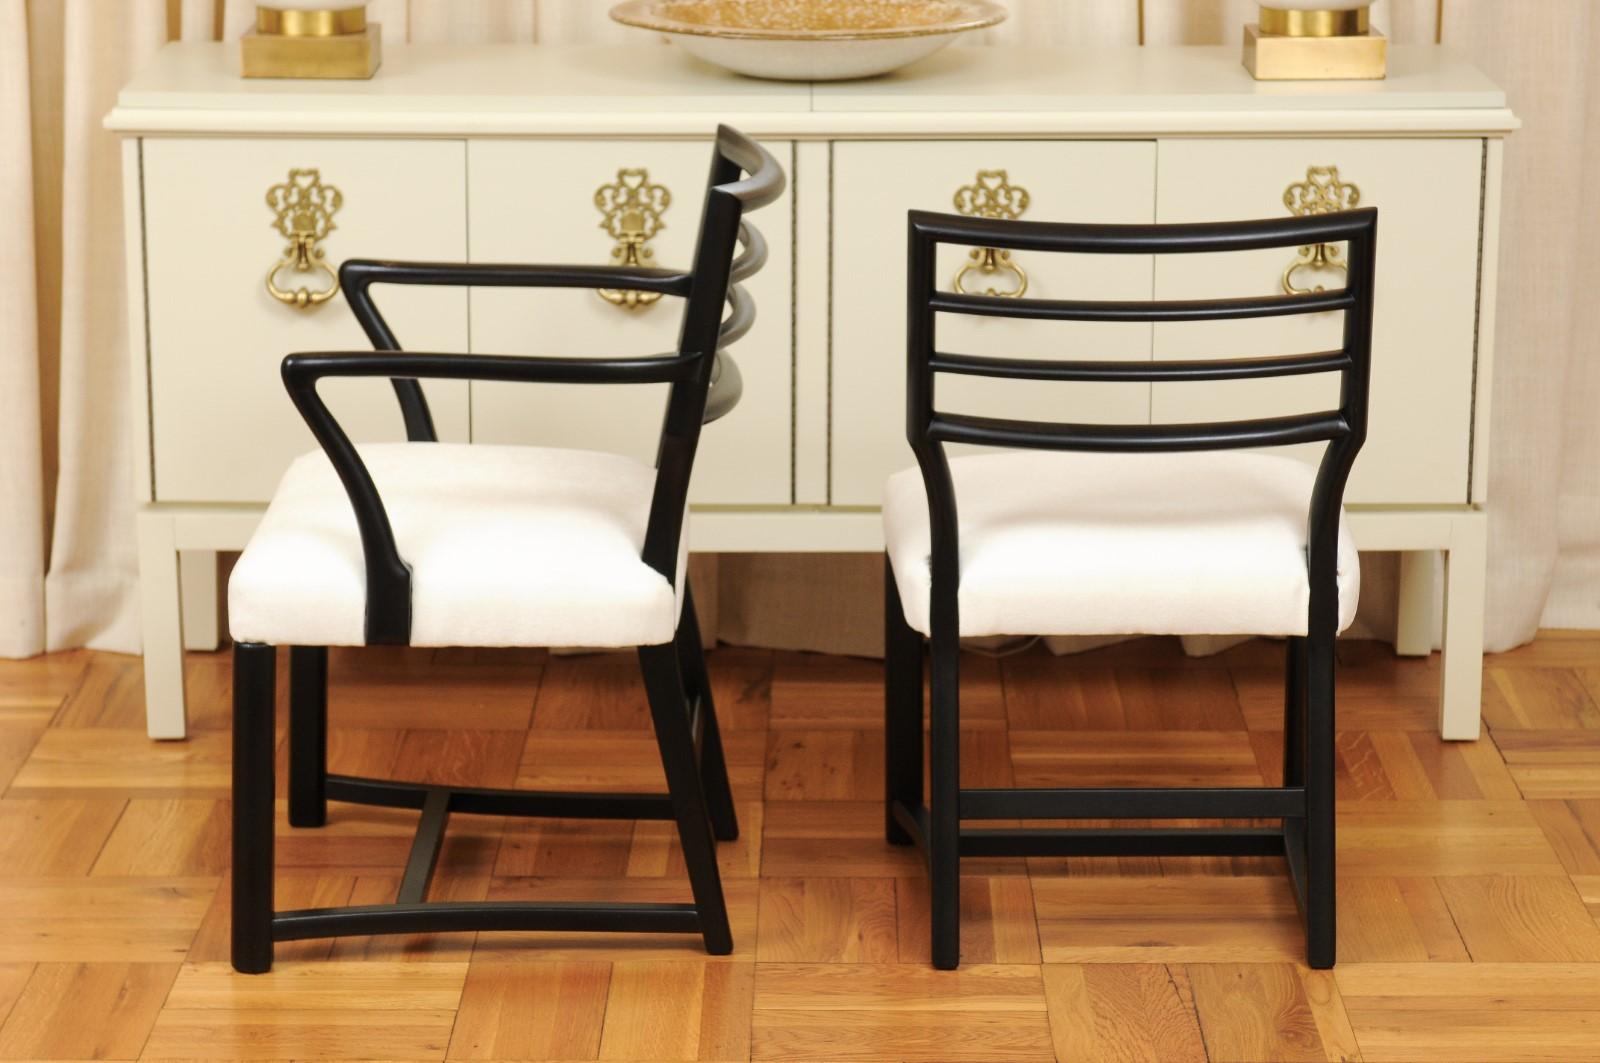 Spectacular Restored Set of 8 Modern Dining Chairs by Michael Taylor, circa 1957 For Sale 2